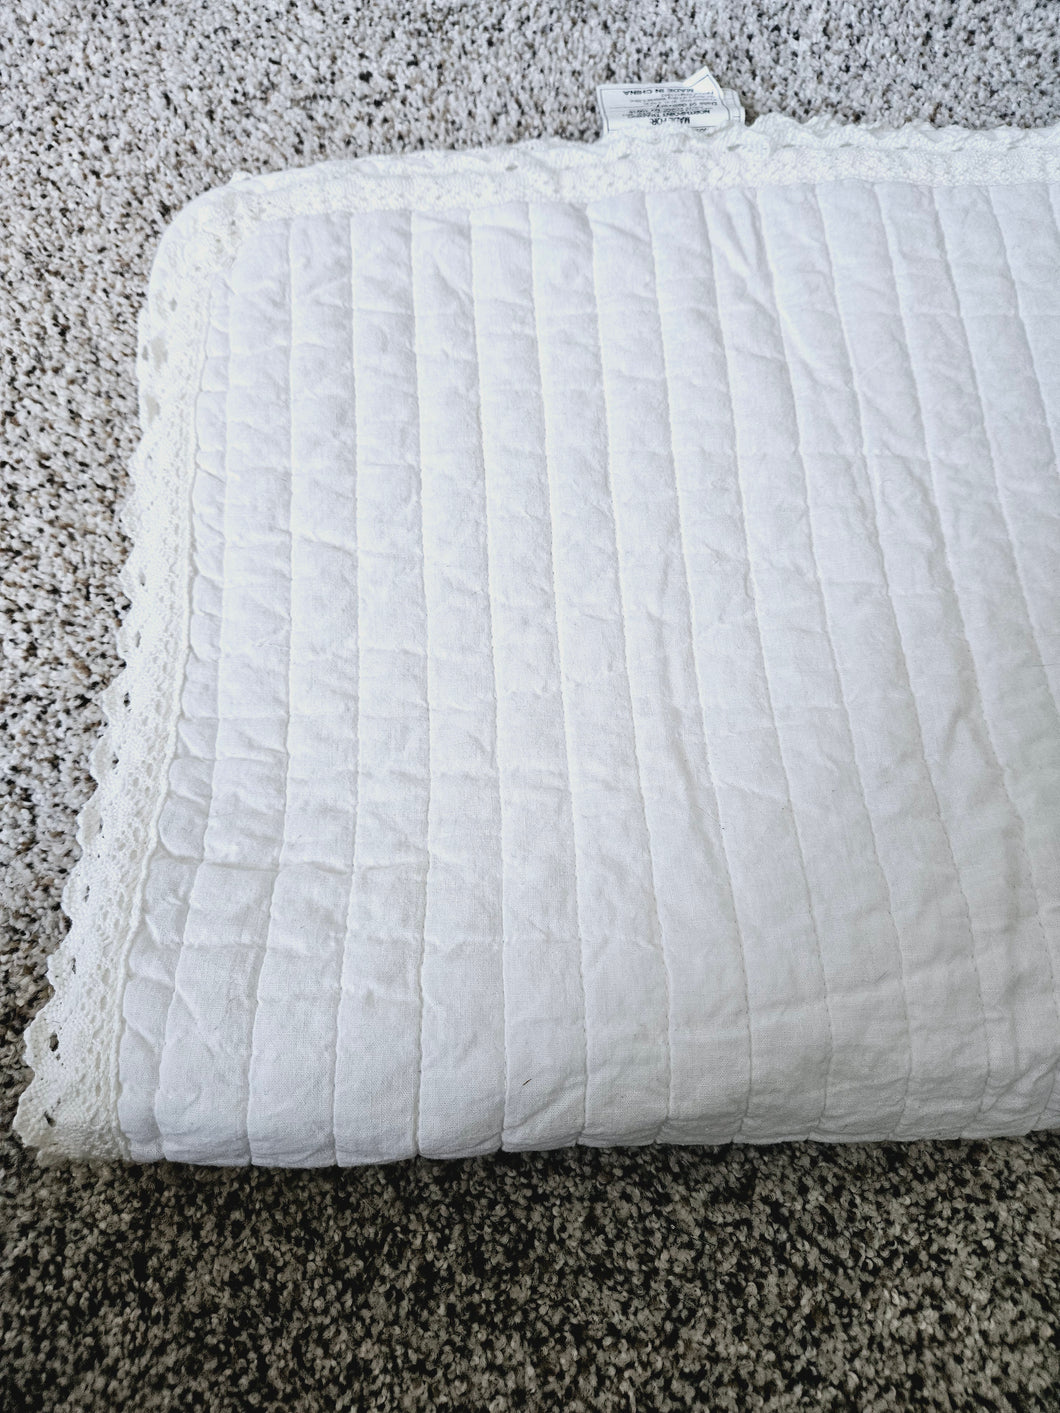 Monlaipin quilted white baby blanket